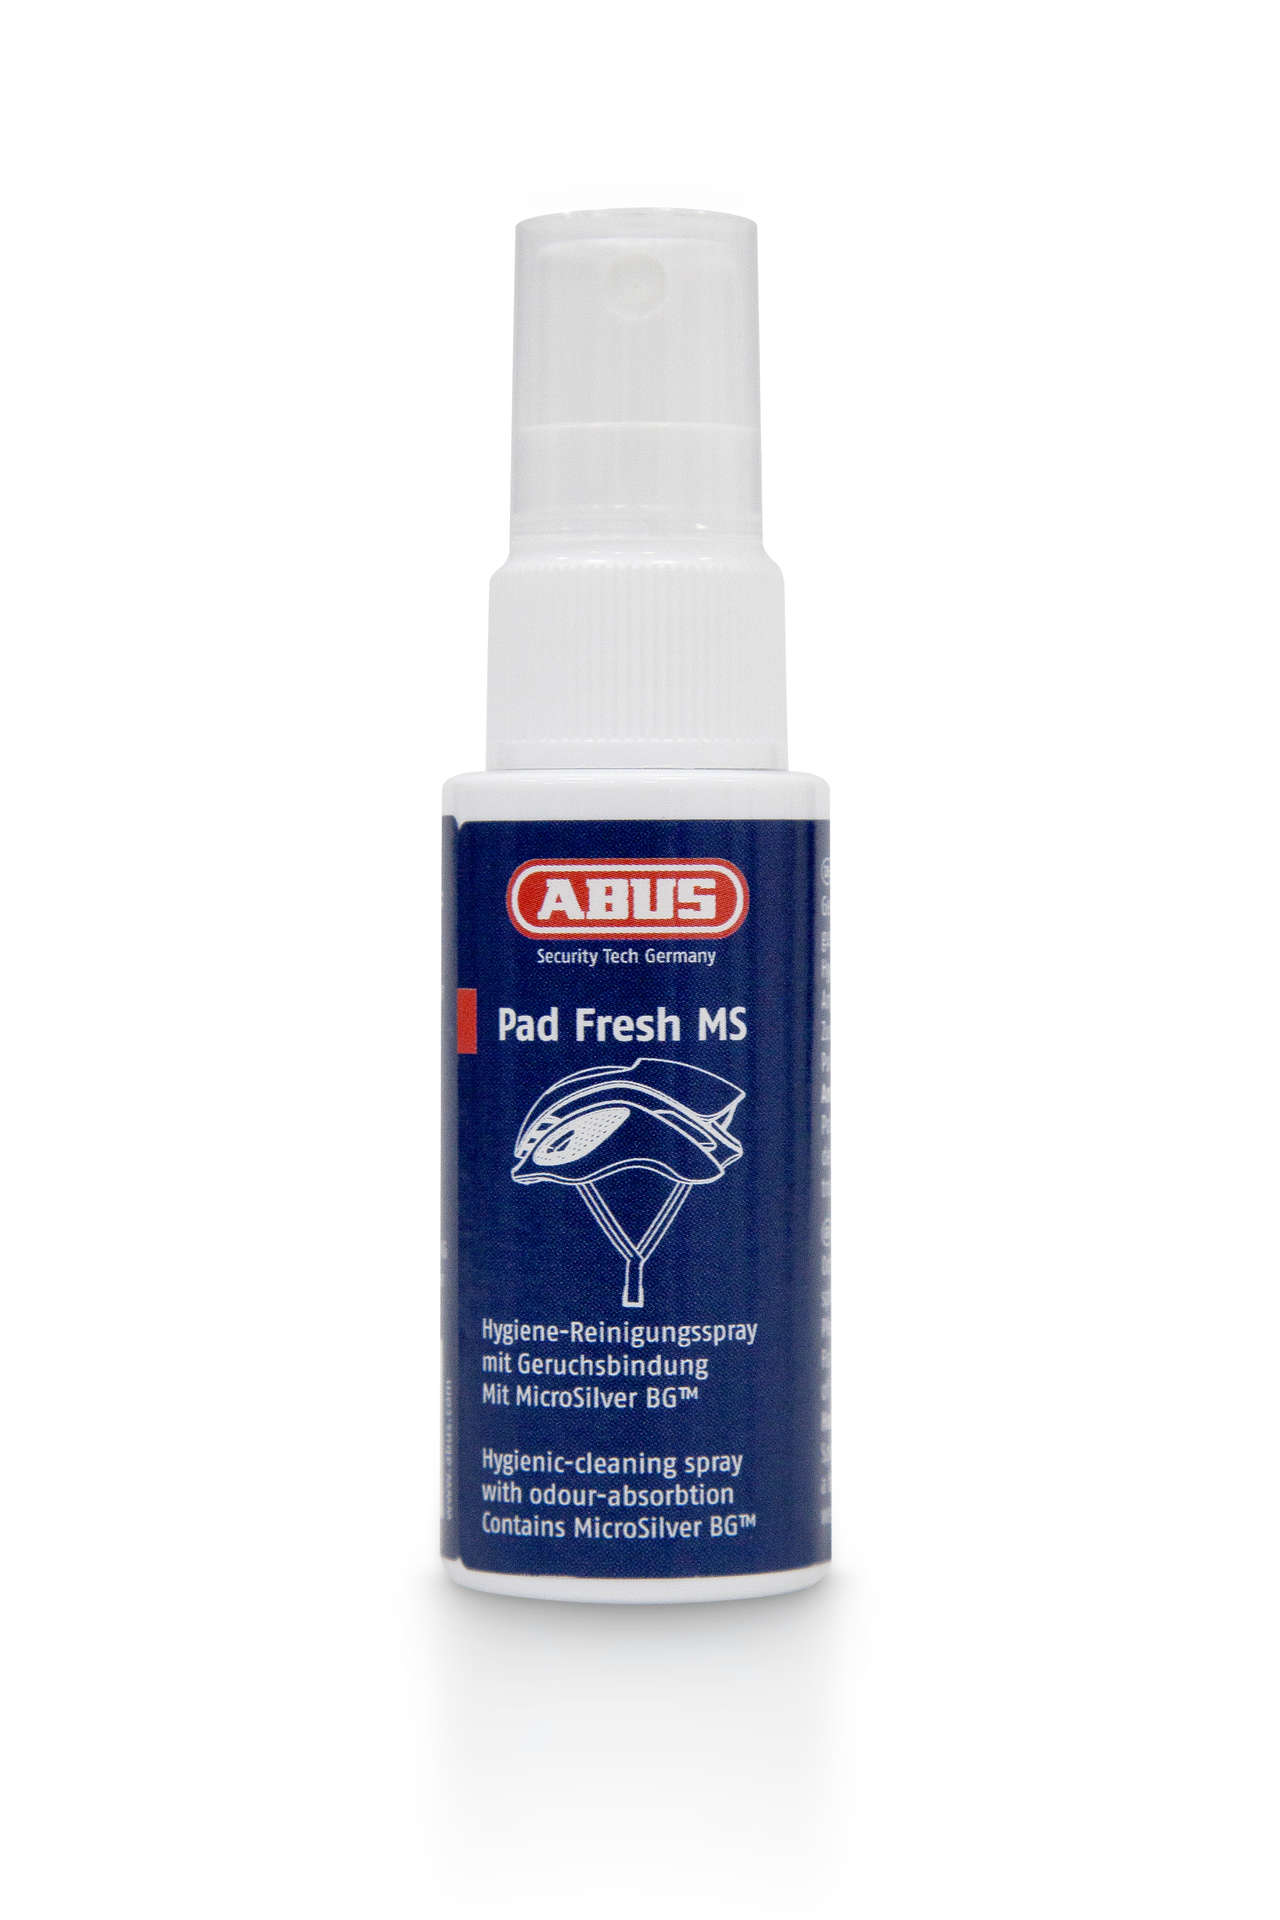 Abus Pad Fresh MS Cleaning Spray